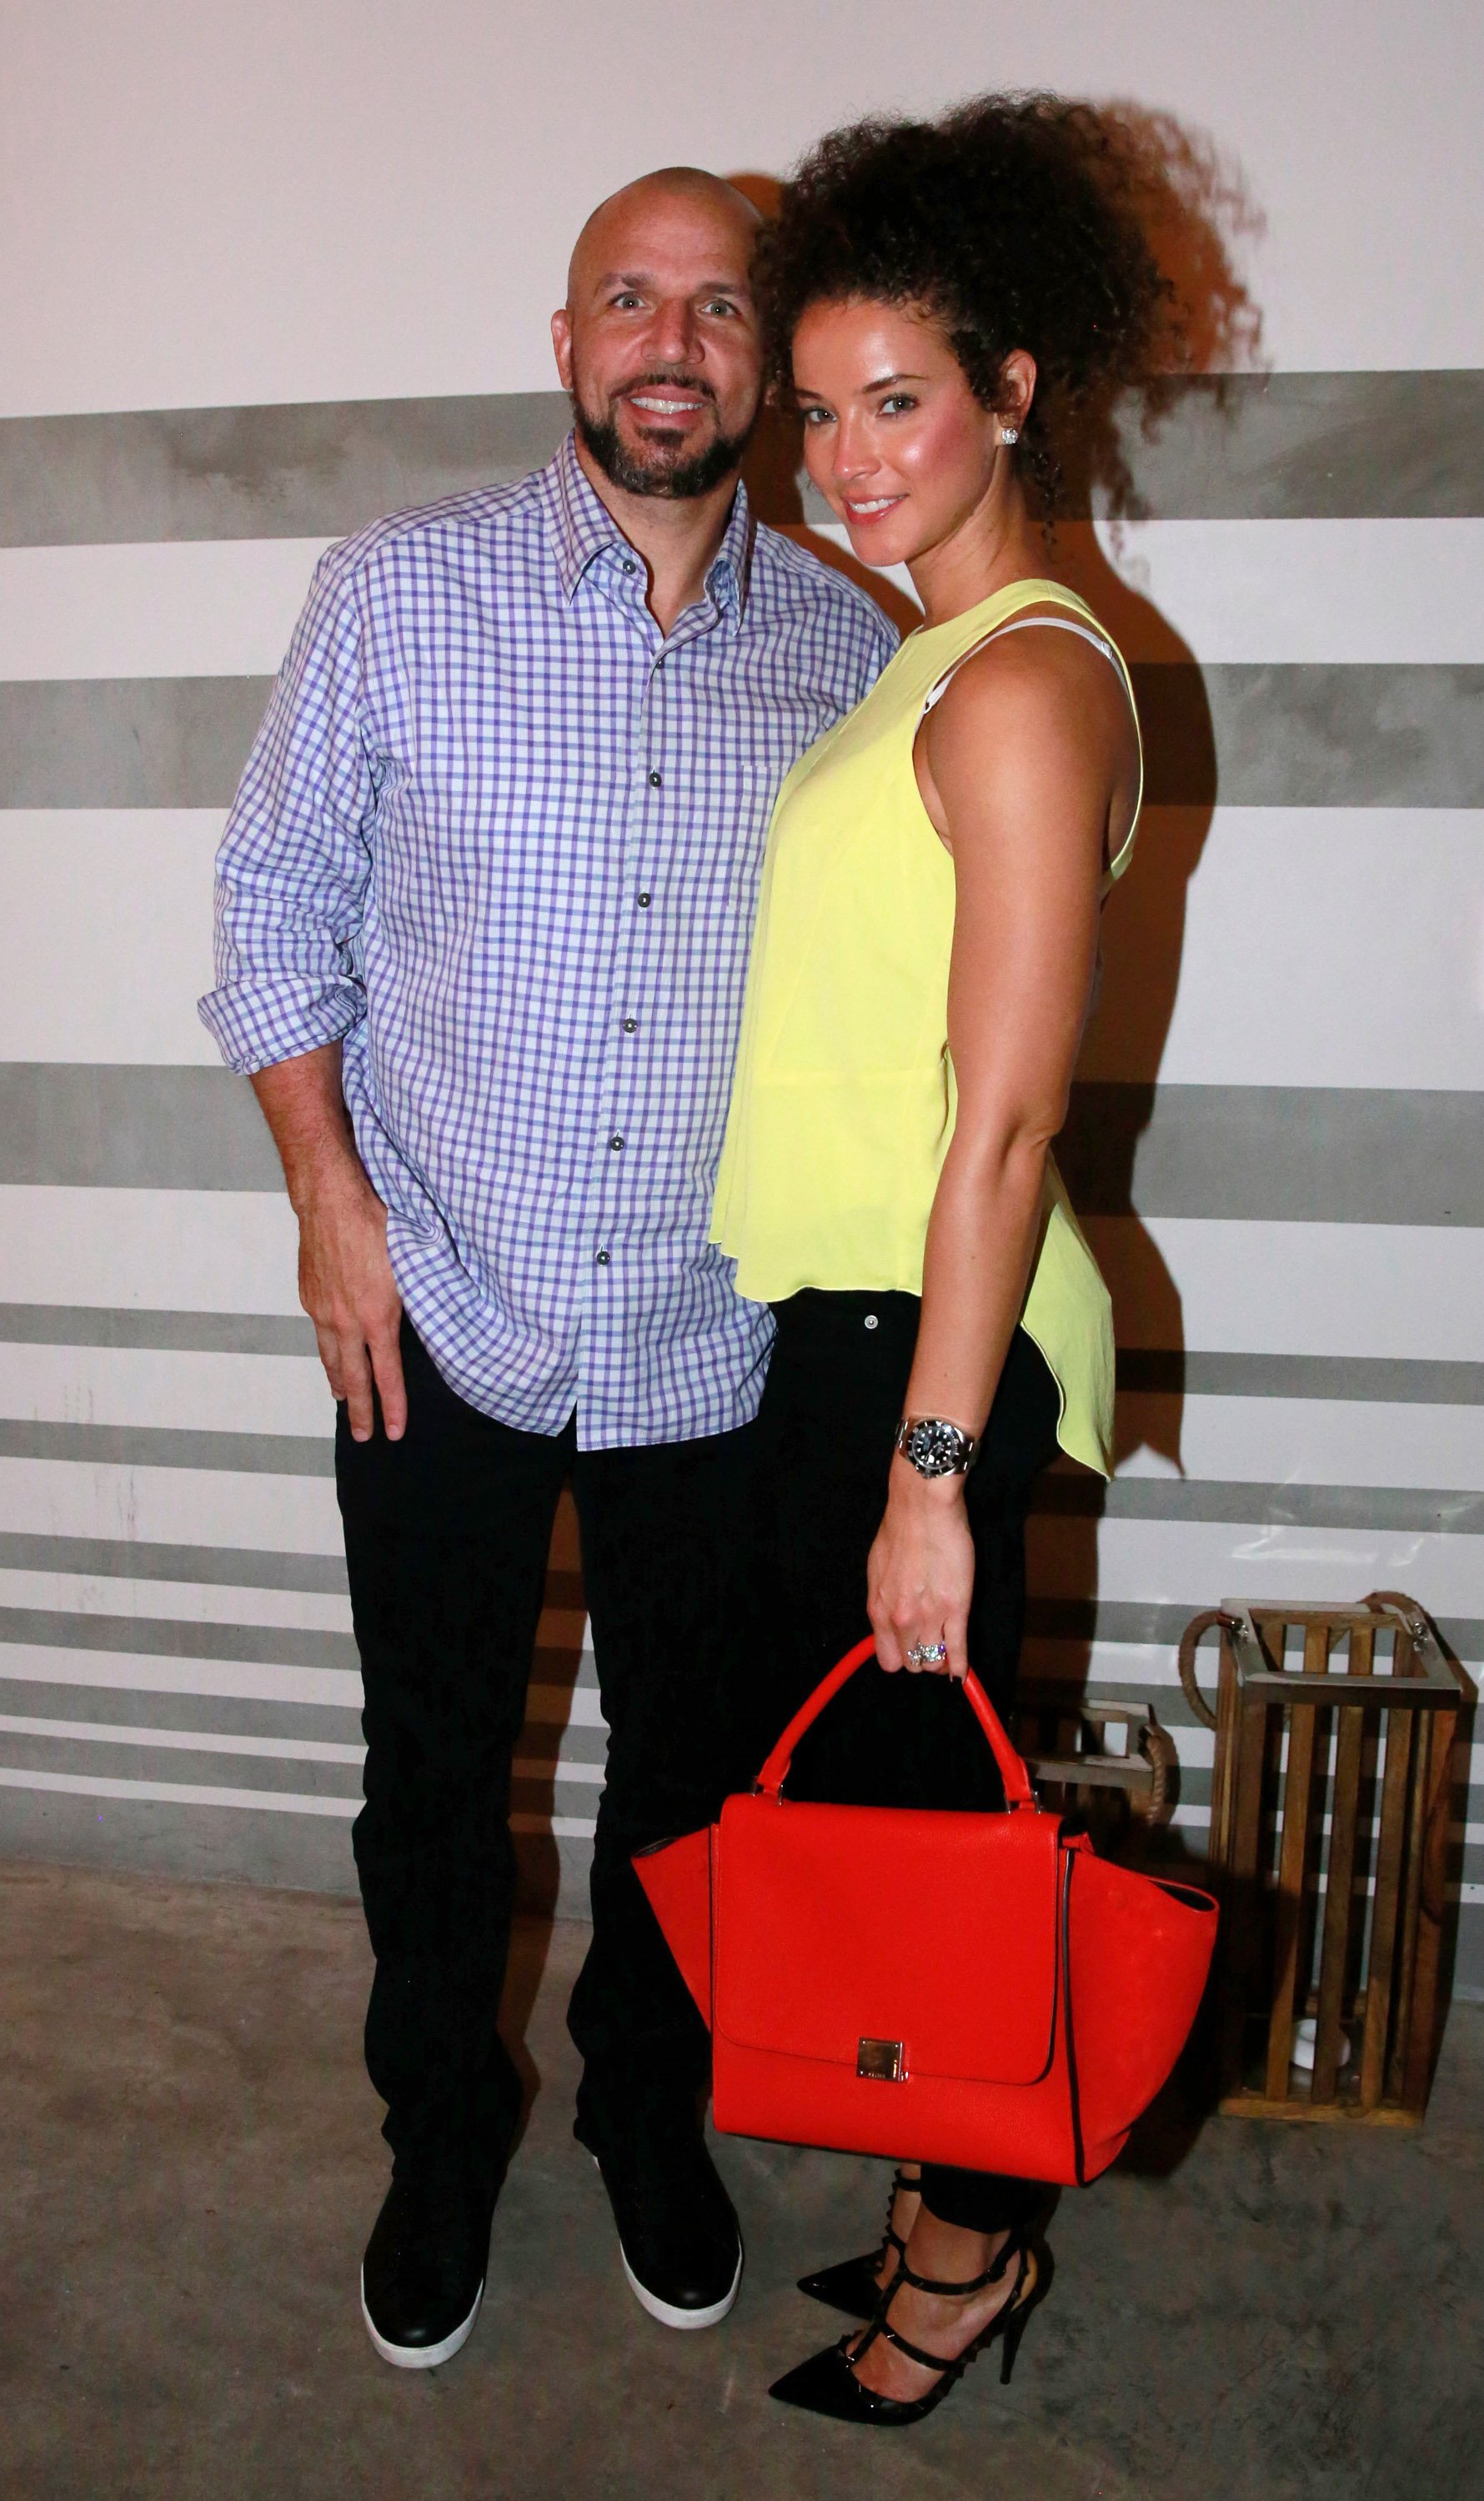 Jason Kidd and Porschla Coleman at Seasalt and Pepper restaurant on April 6, 2014, in Miami, Florida. | Source: Getty Images